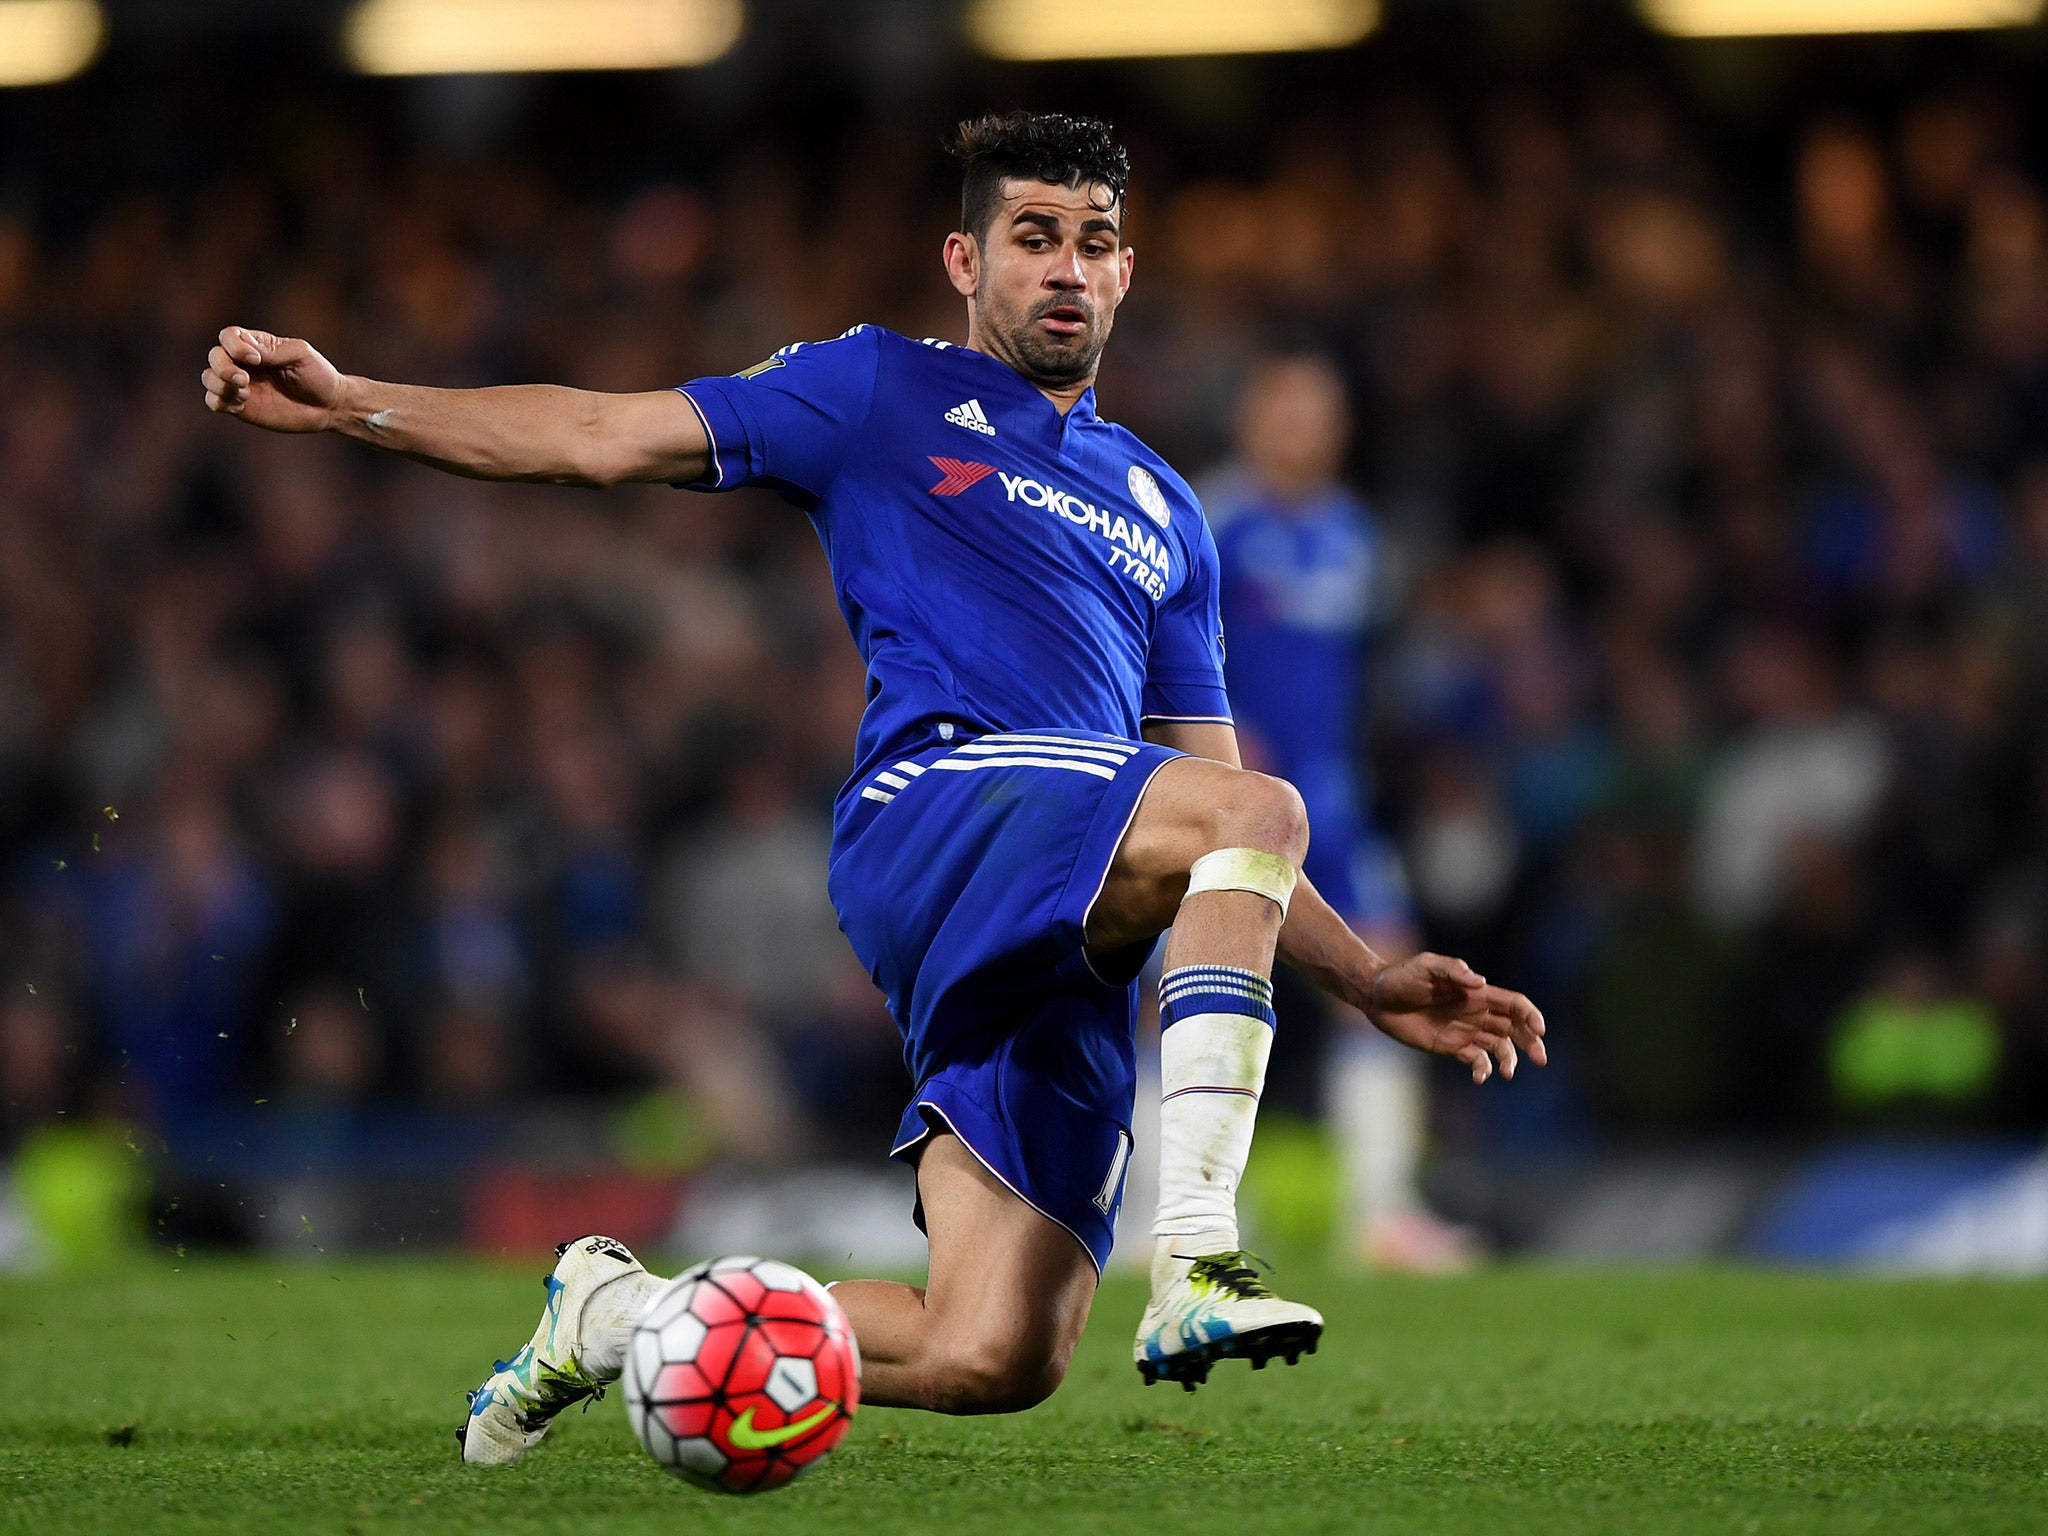 Diego Costa has been left out of Spain's preliminary 25-man squad for Euro 2016